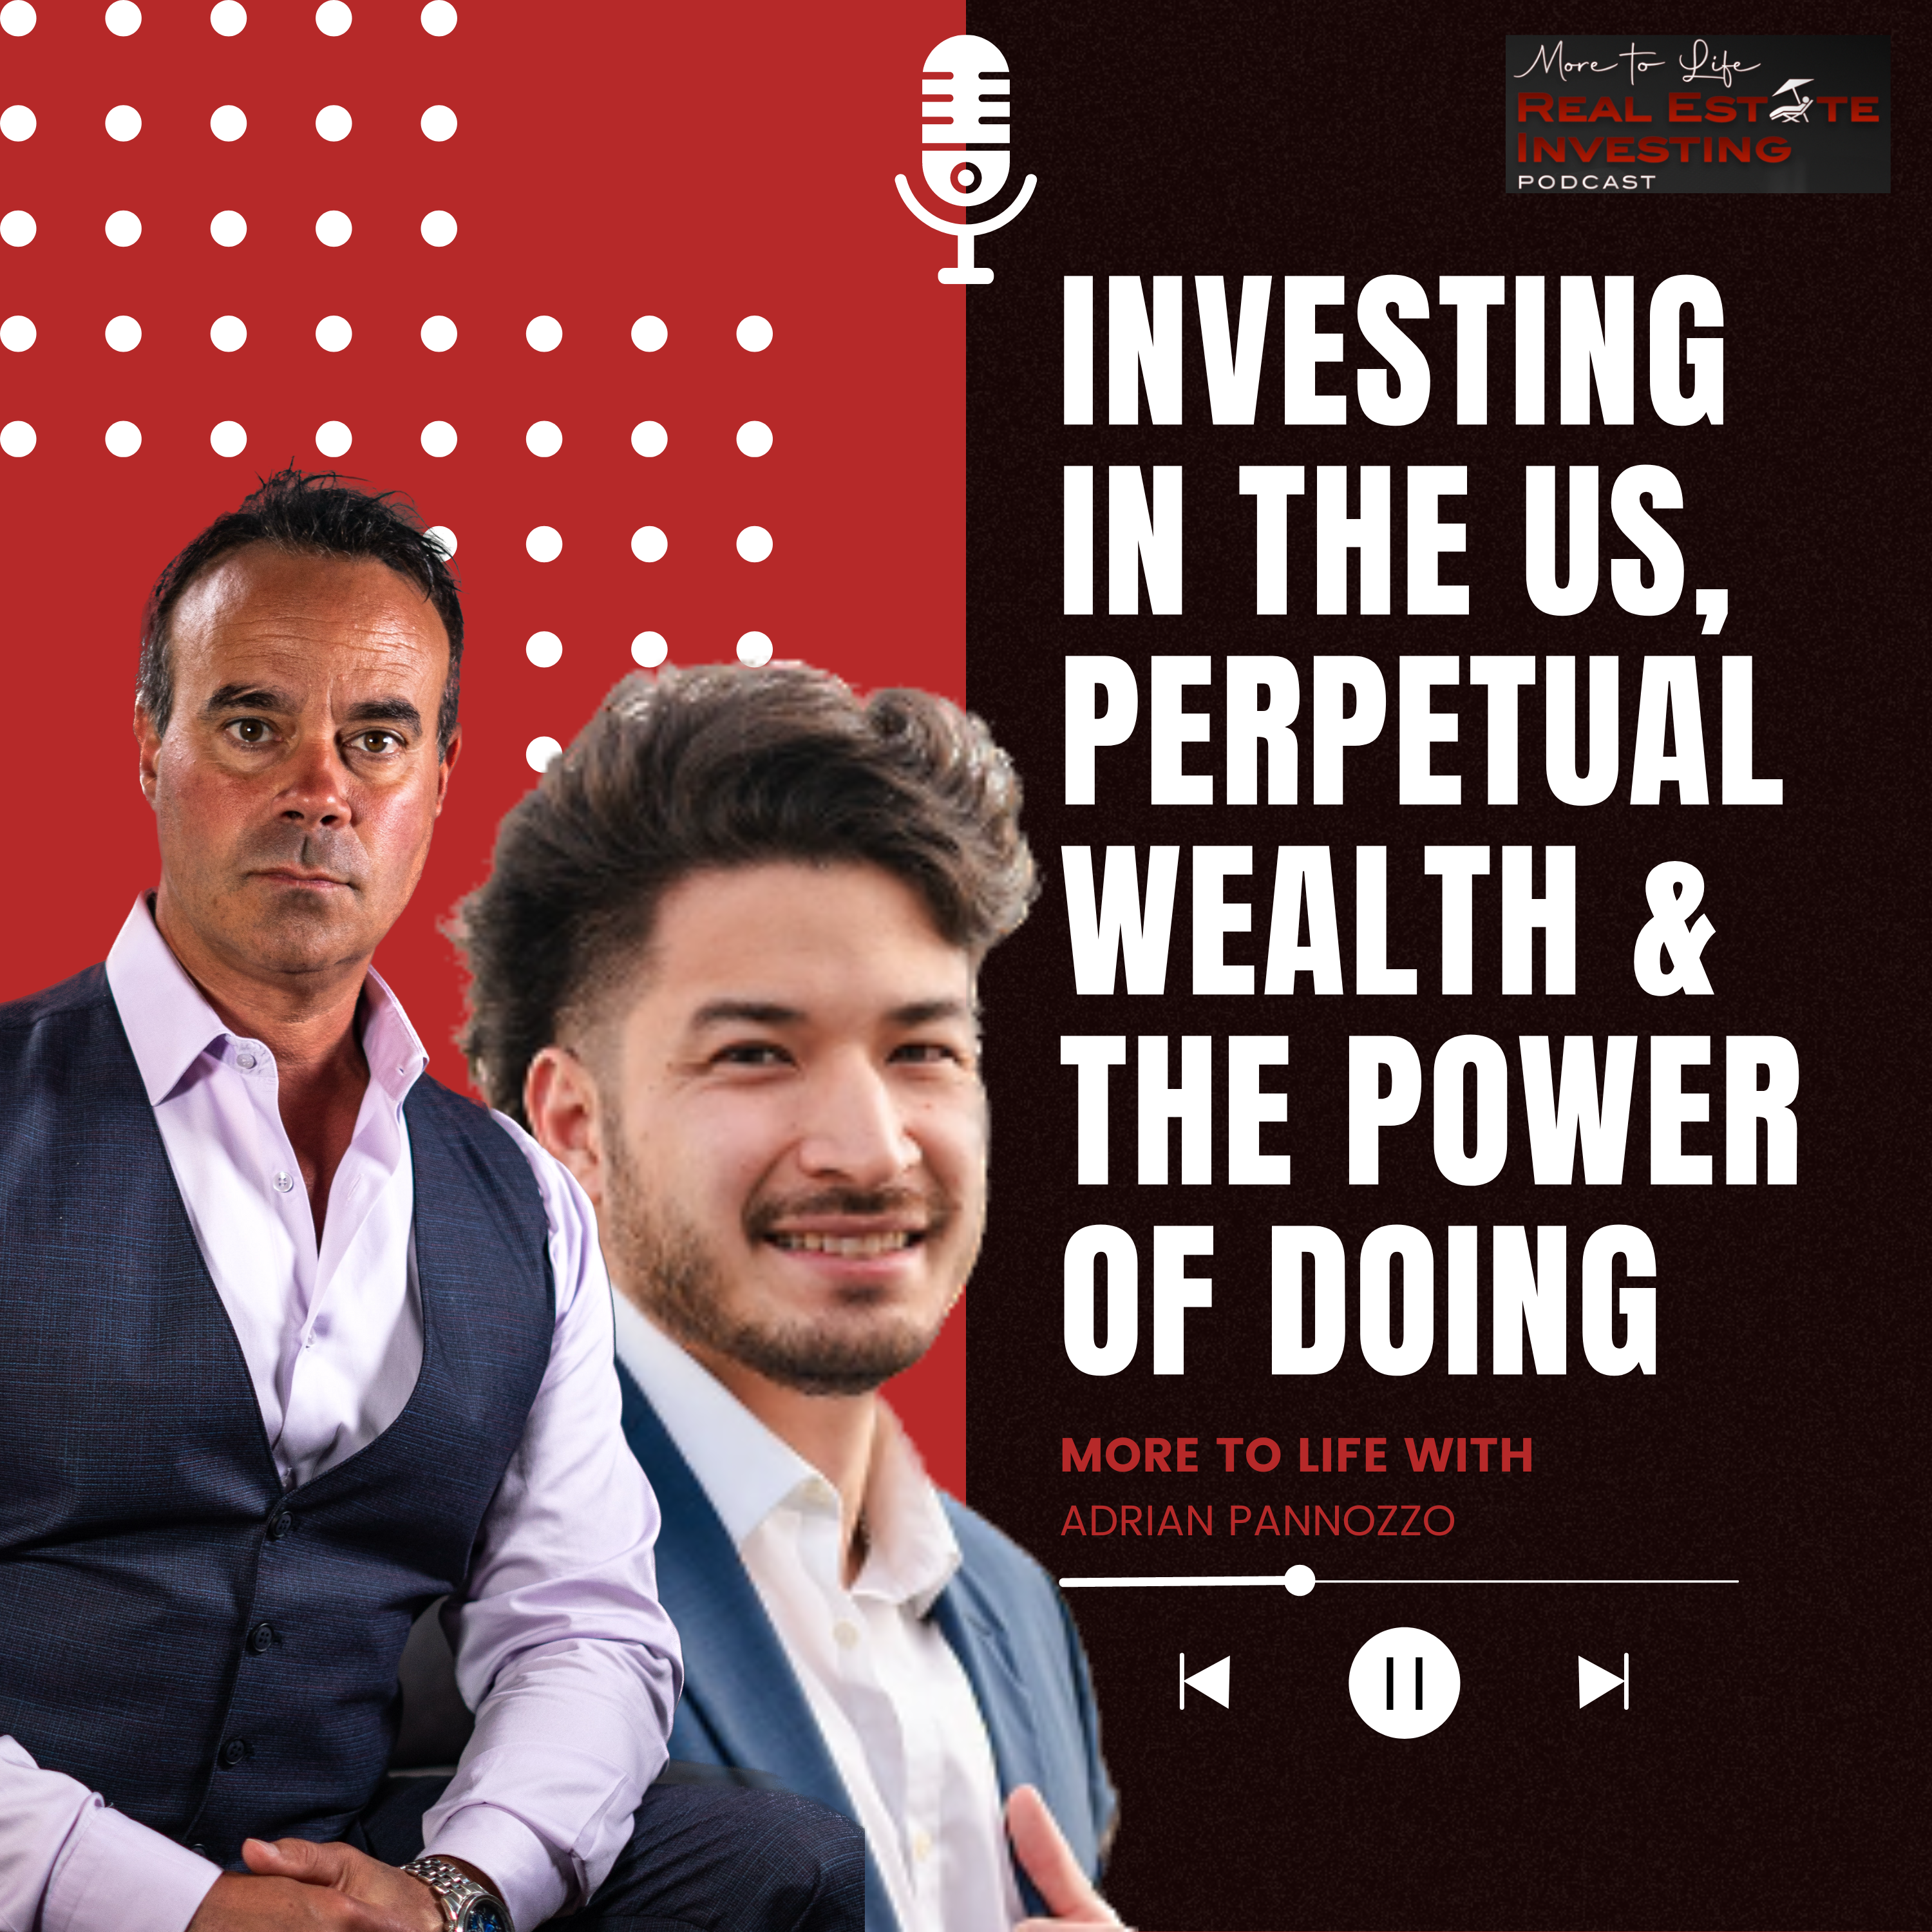 Investing In The U.S., Perpetual Wealth & The Power Of Doing with Justin Moy